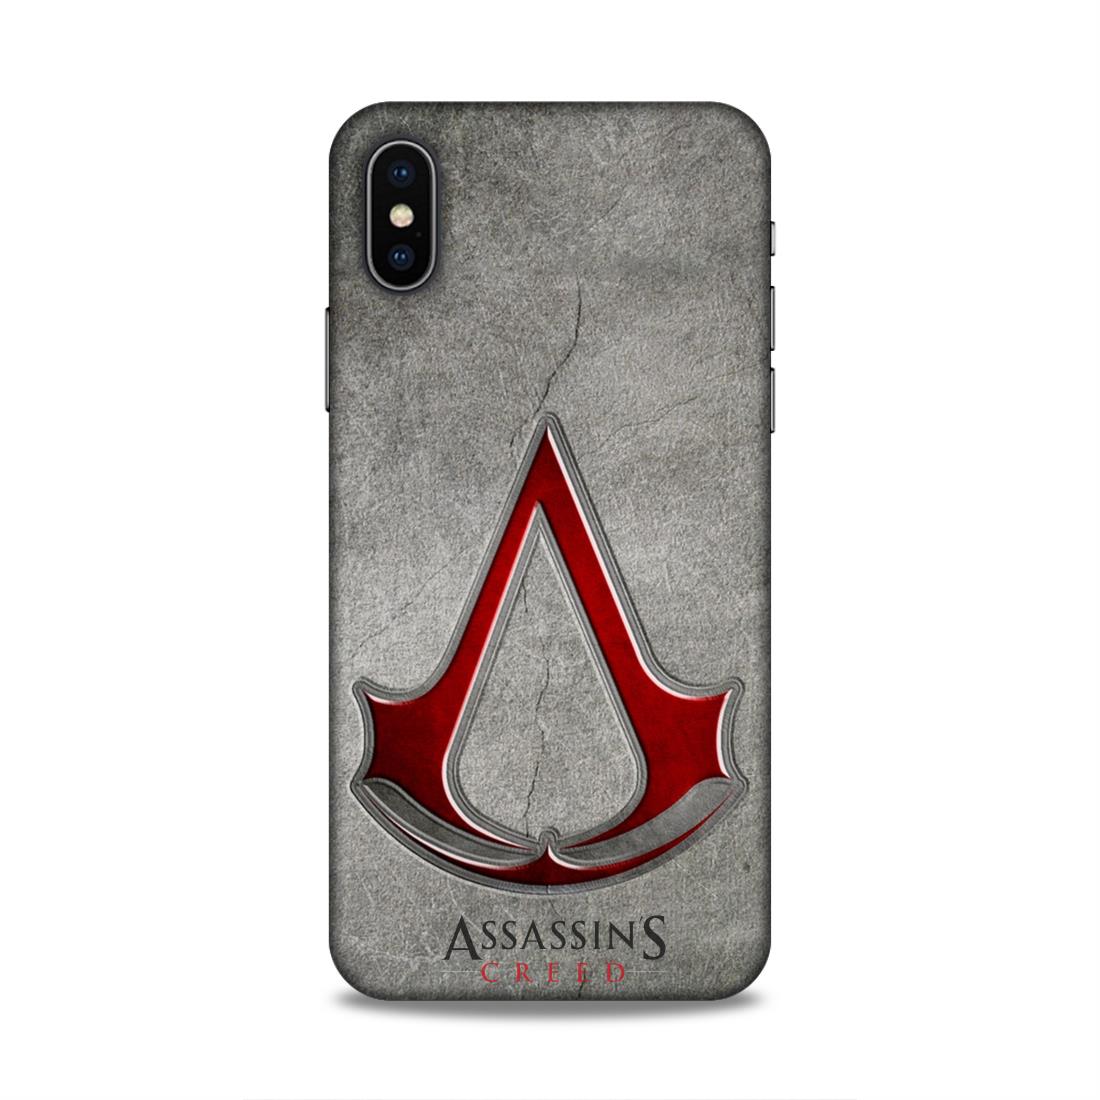 Assassin's Creed Hard Back Case For Apple iPhone X/XS